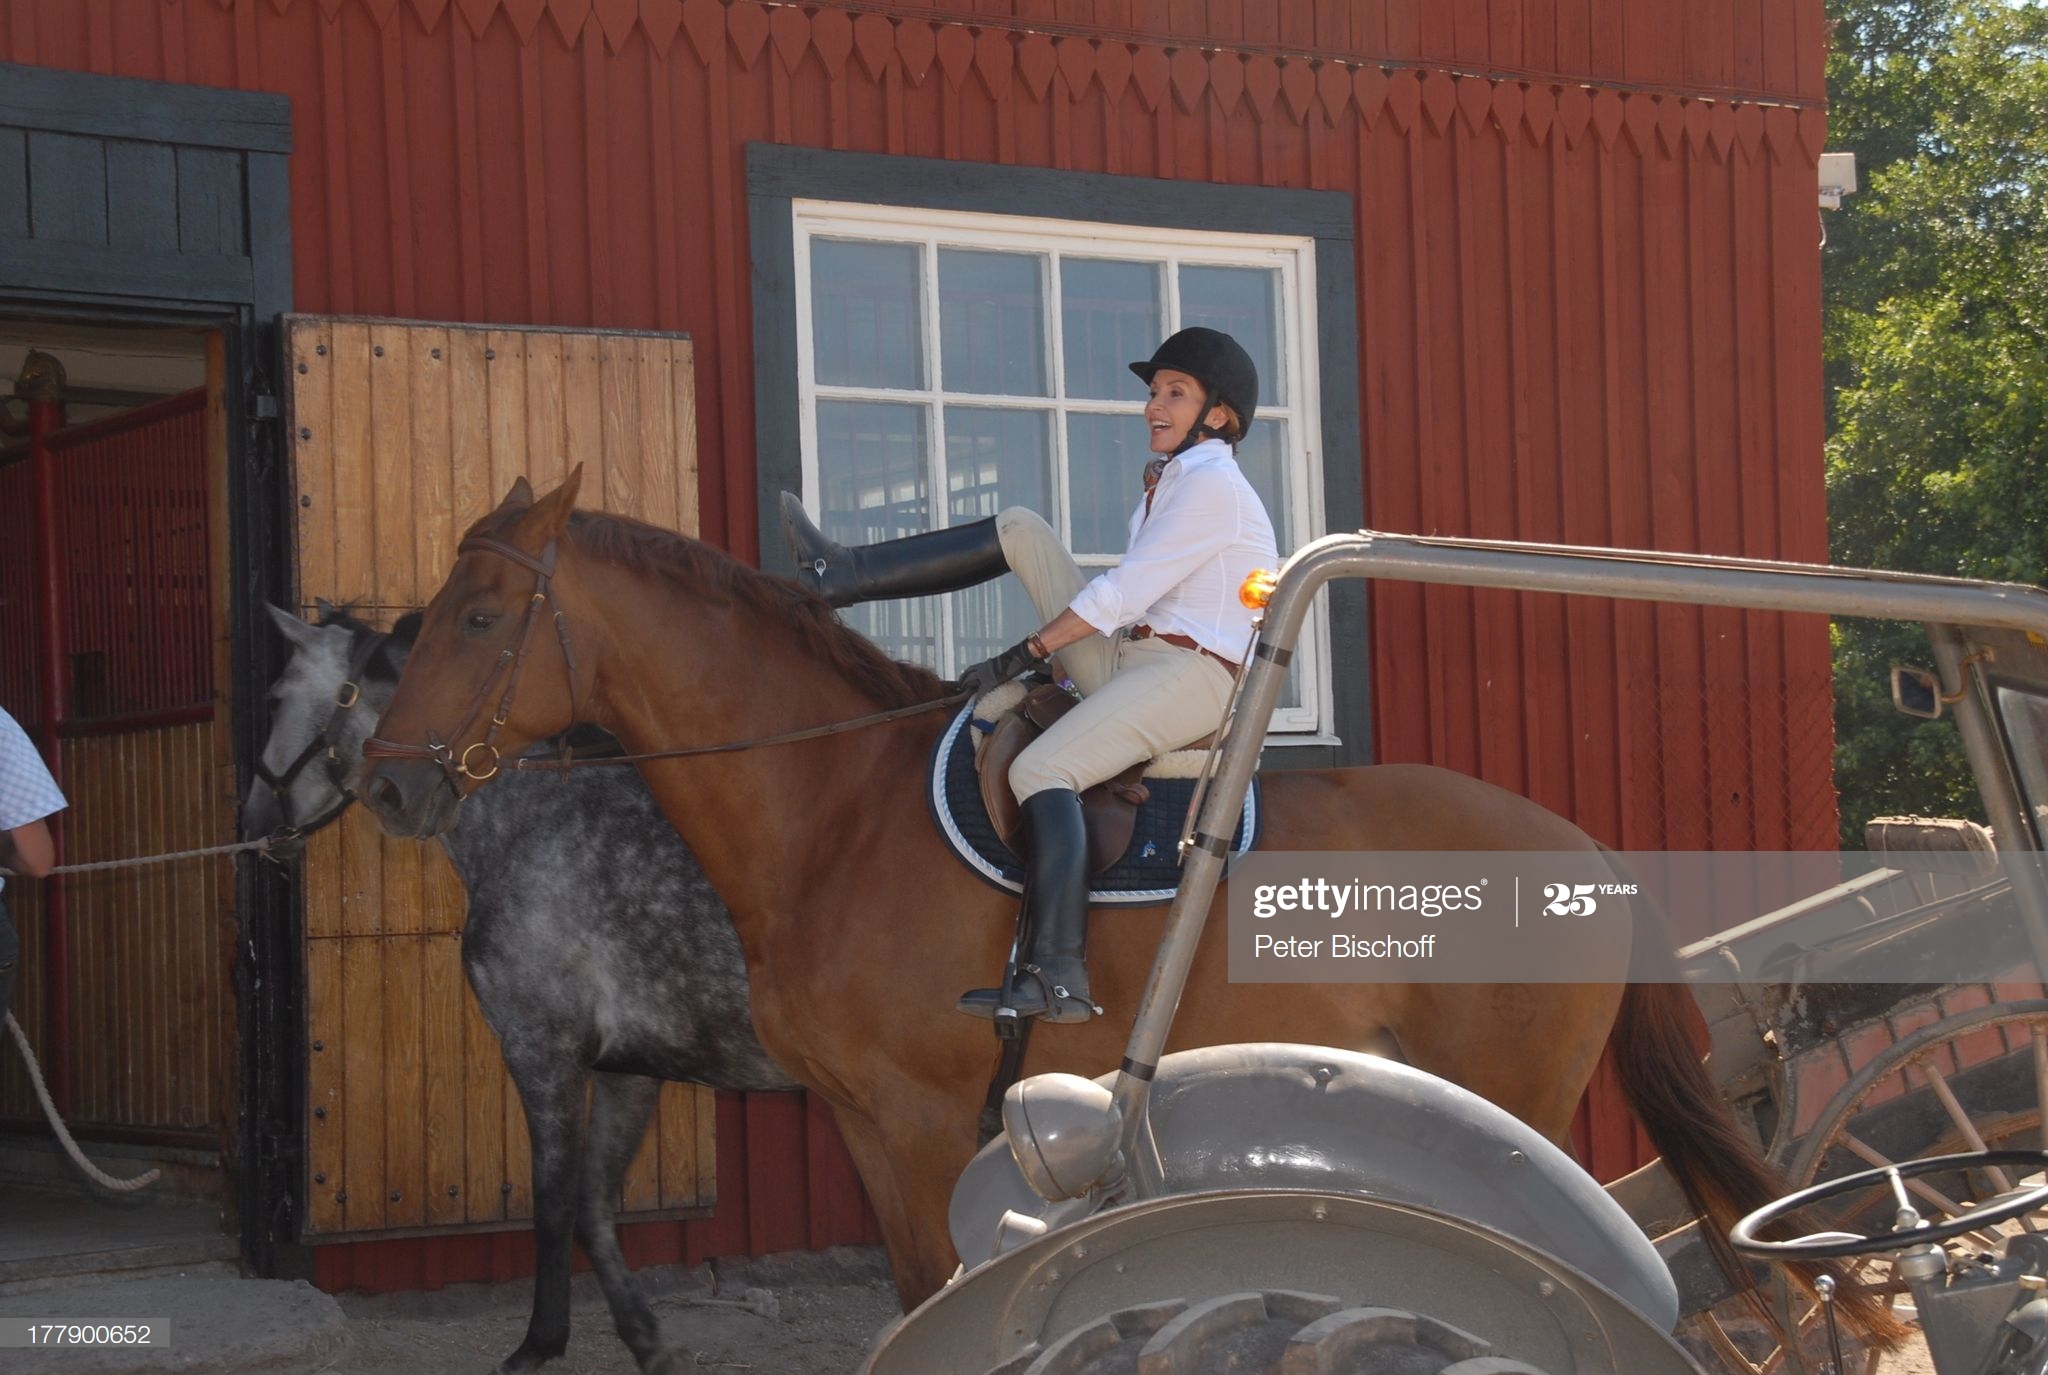 Re: Films and TV shows that feature riding boots. 27020-re--films-and-tv-shows-that-feature-riding-boots-.jpg